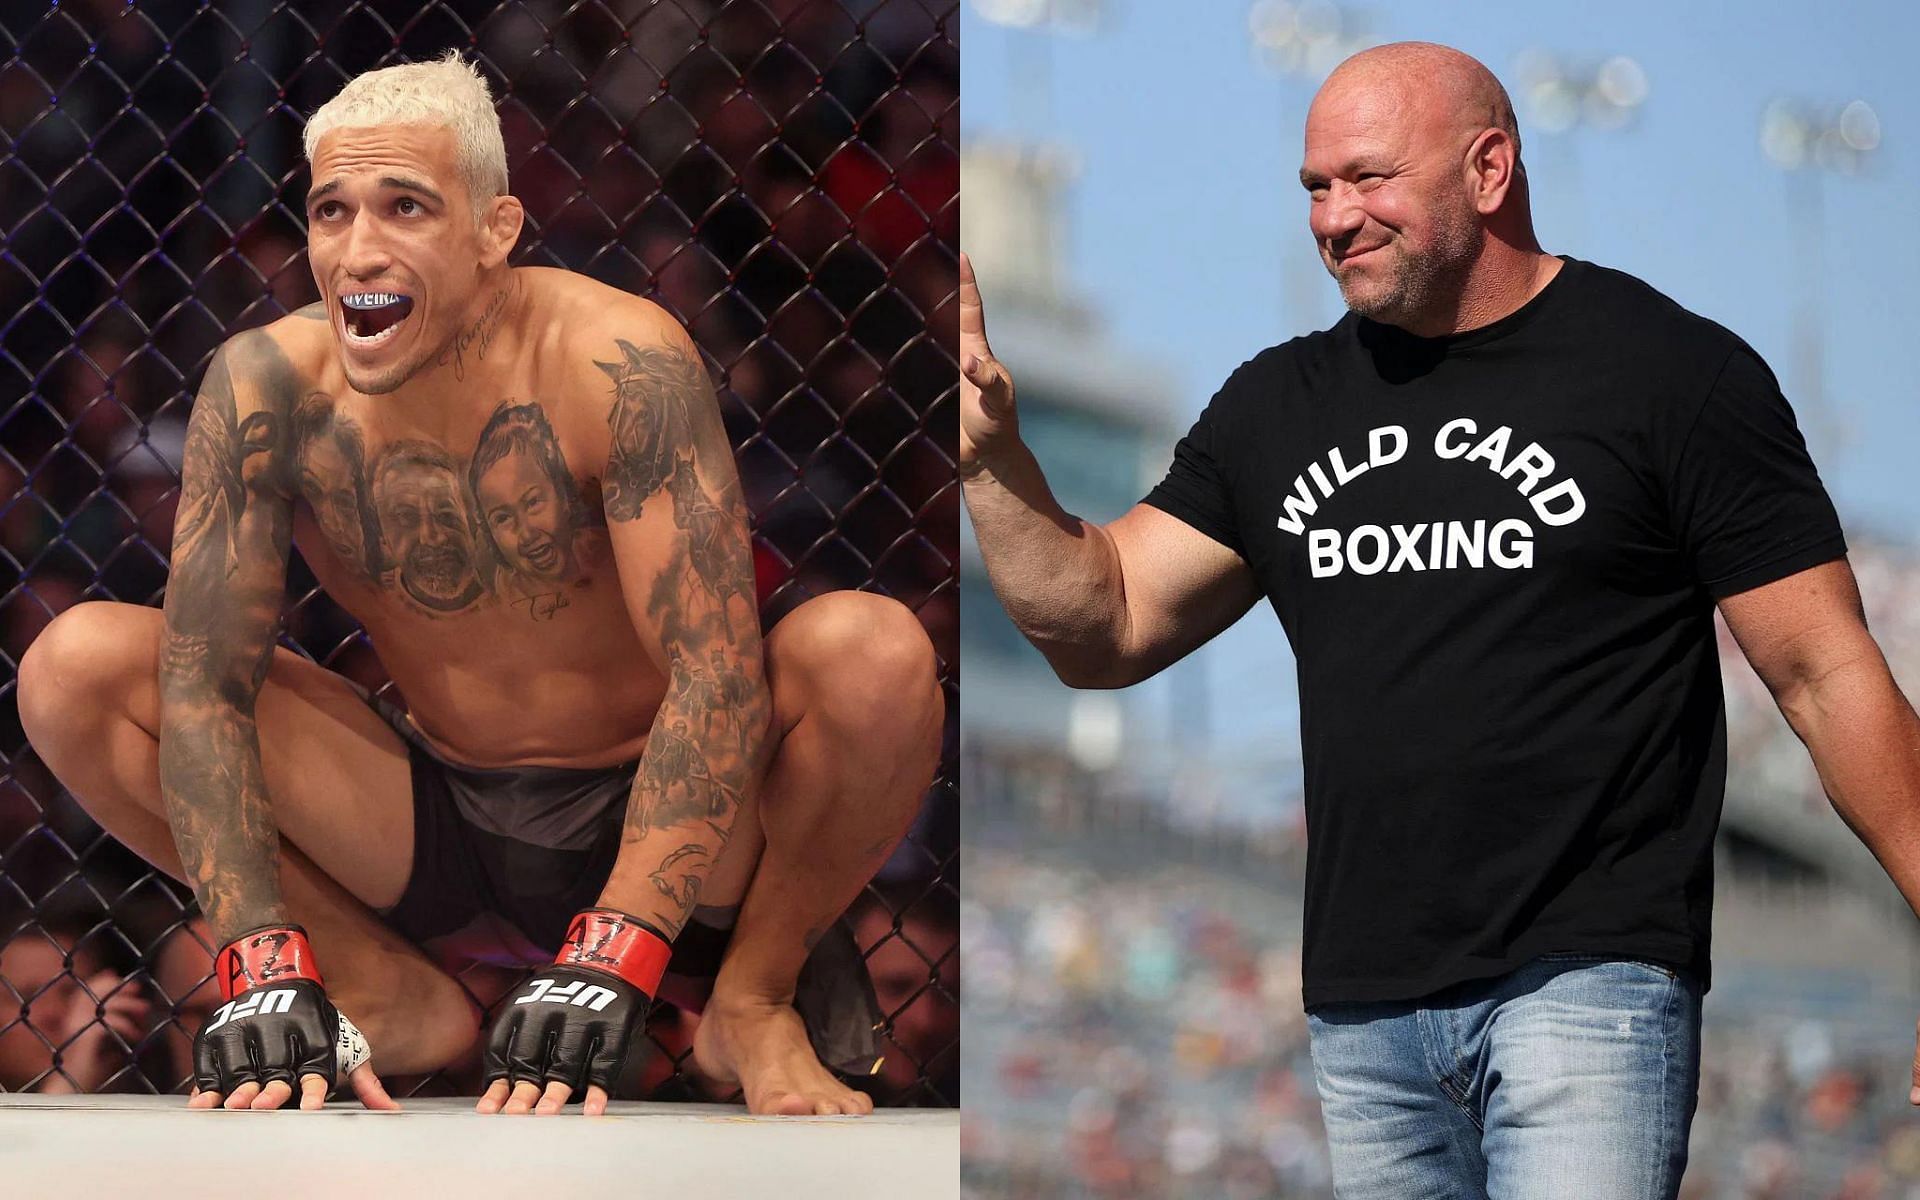 Charles Oliveira (left) and Dana White (right) (Images courtesy of Getty)